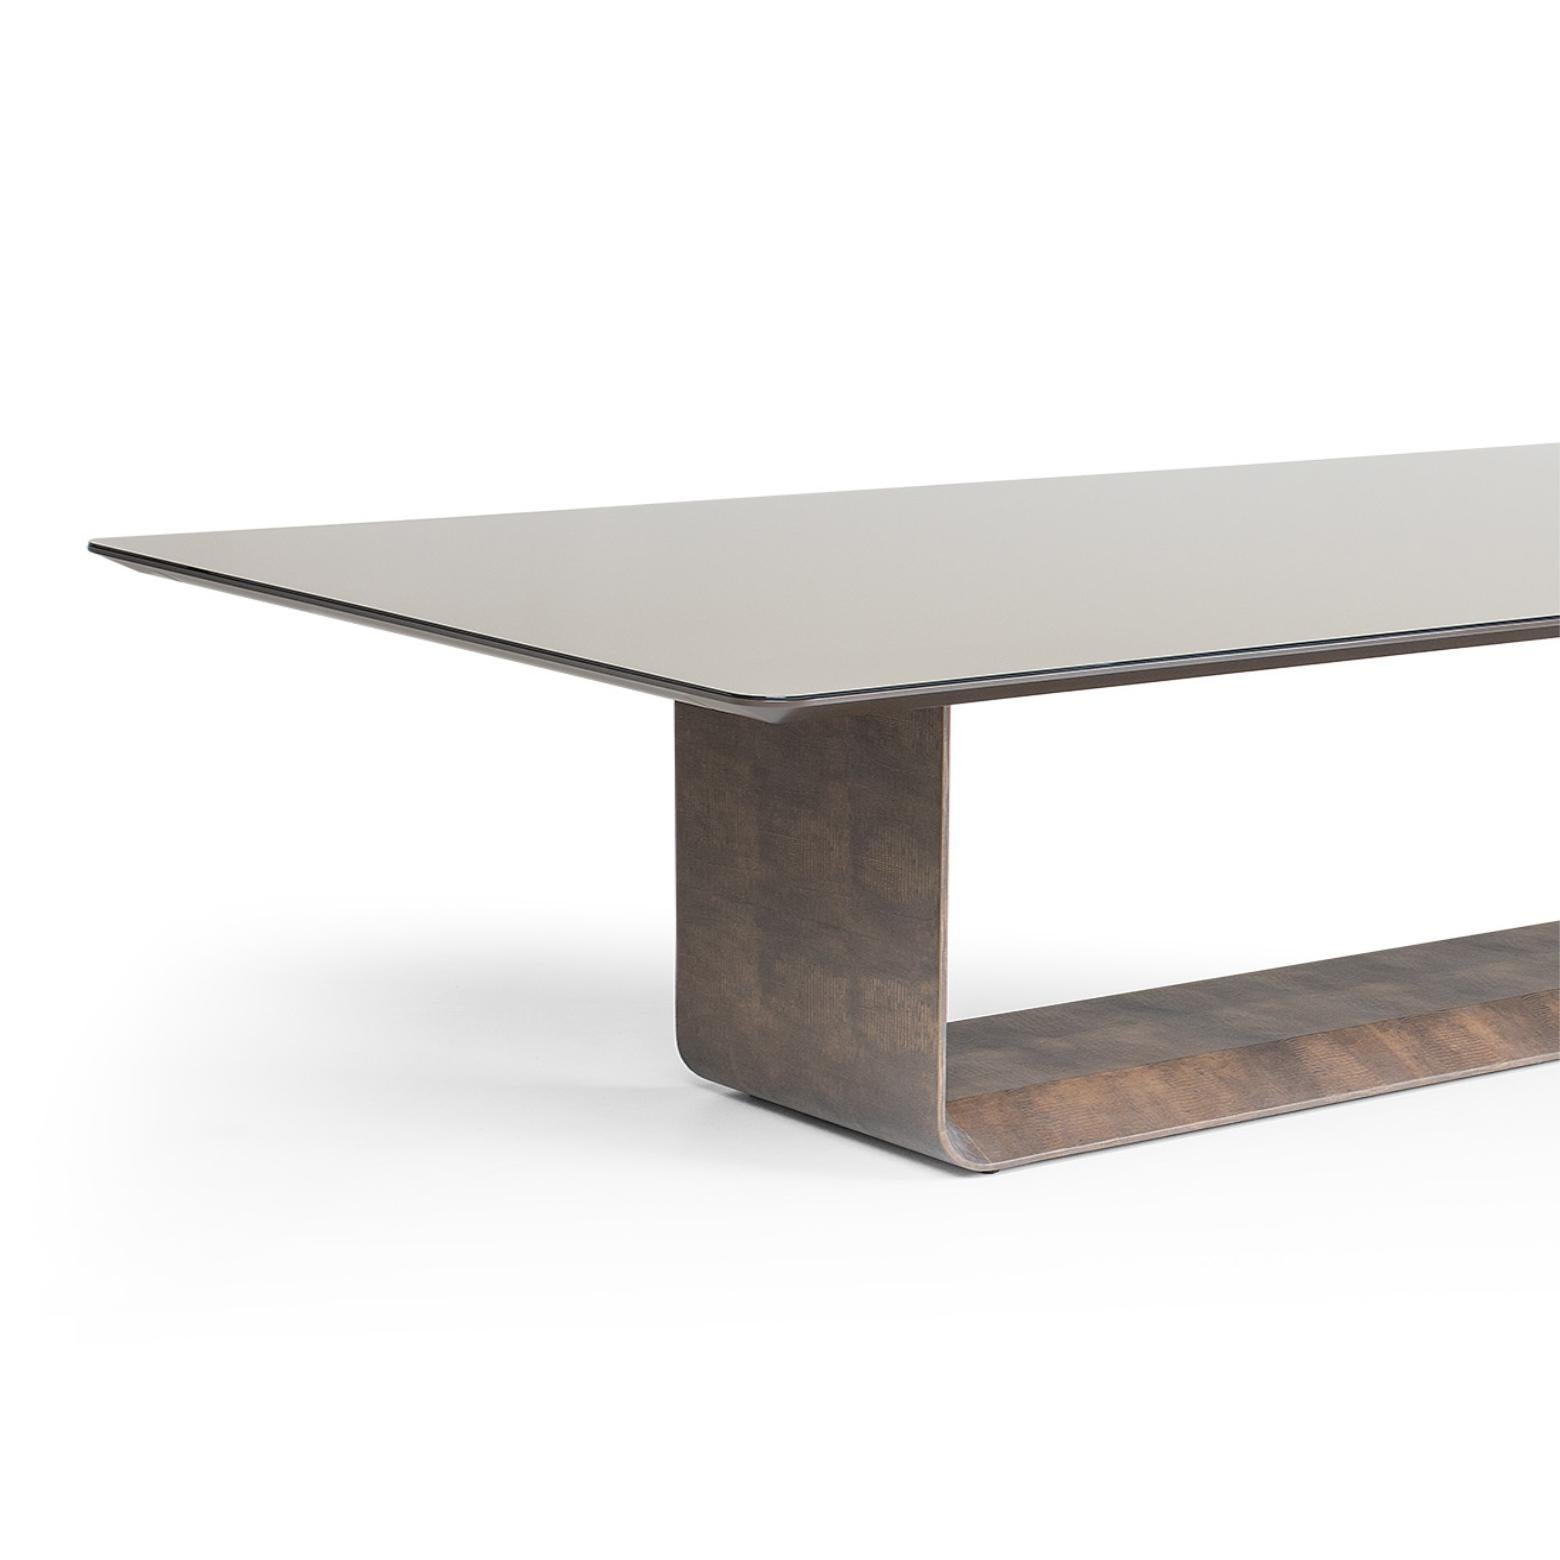 The perfect dining table this table has a bottom coated in leather and a top with mirrored glass. An outstanding piece to have in your dining area.
Structure: MDF - coated leather
Top: Glass or mirror.

